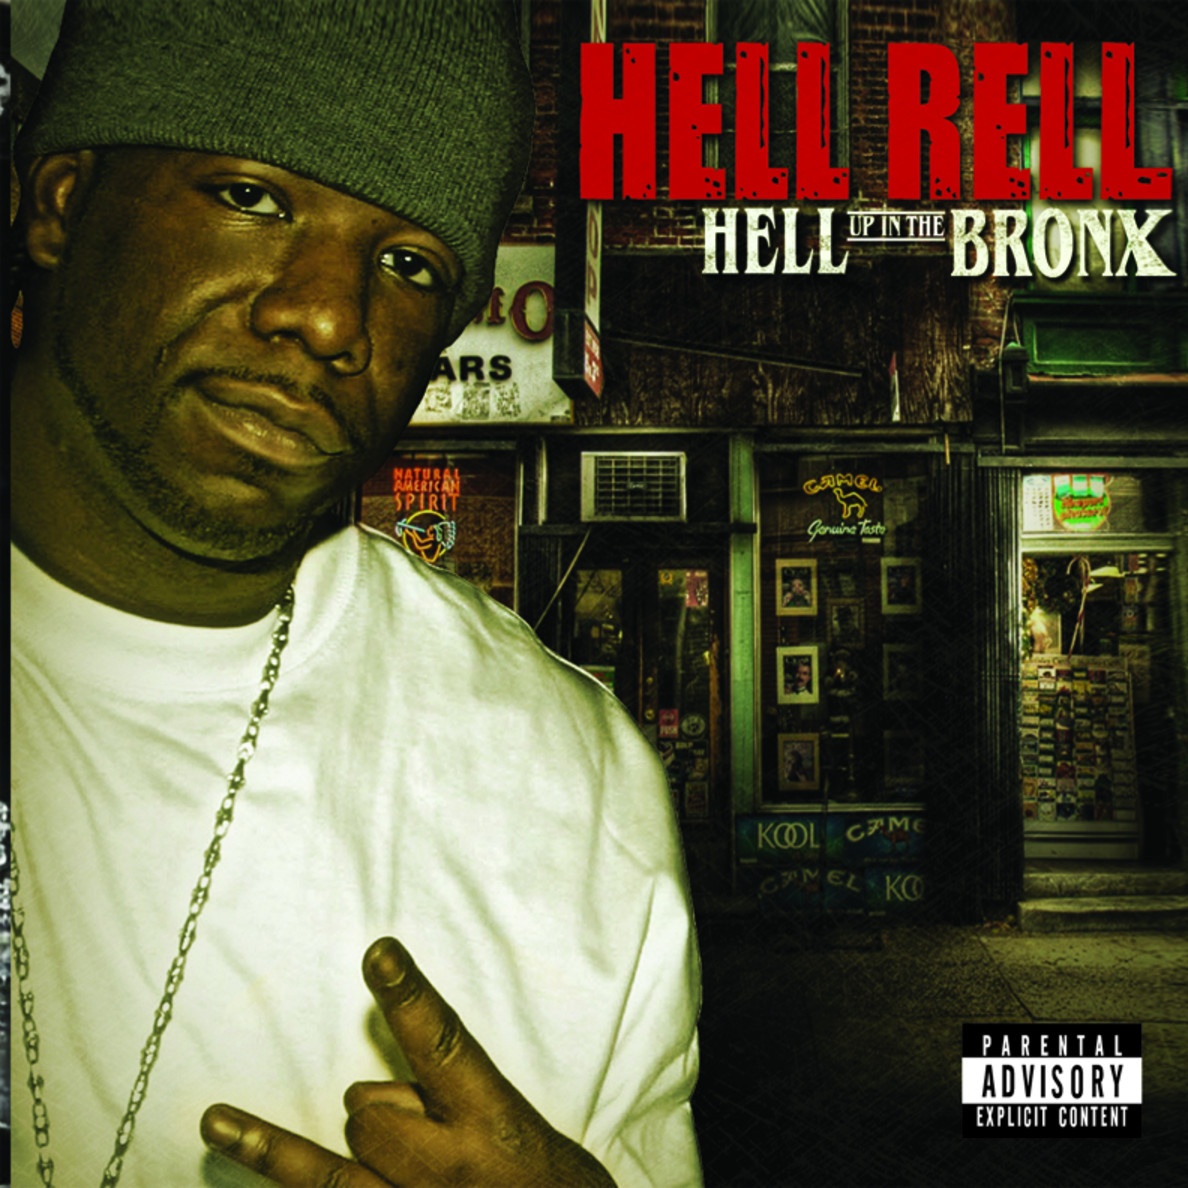 Hell Up In The Bronx